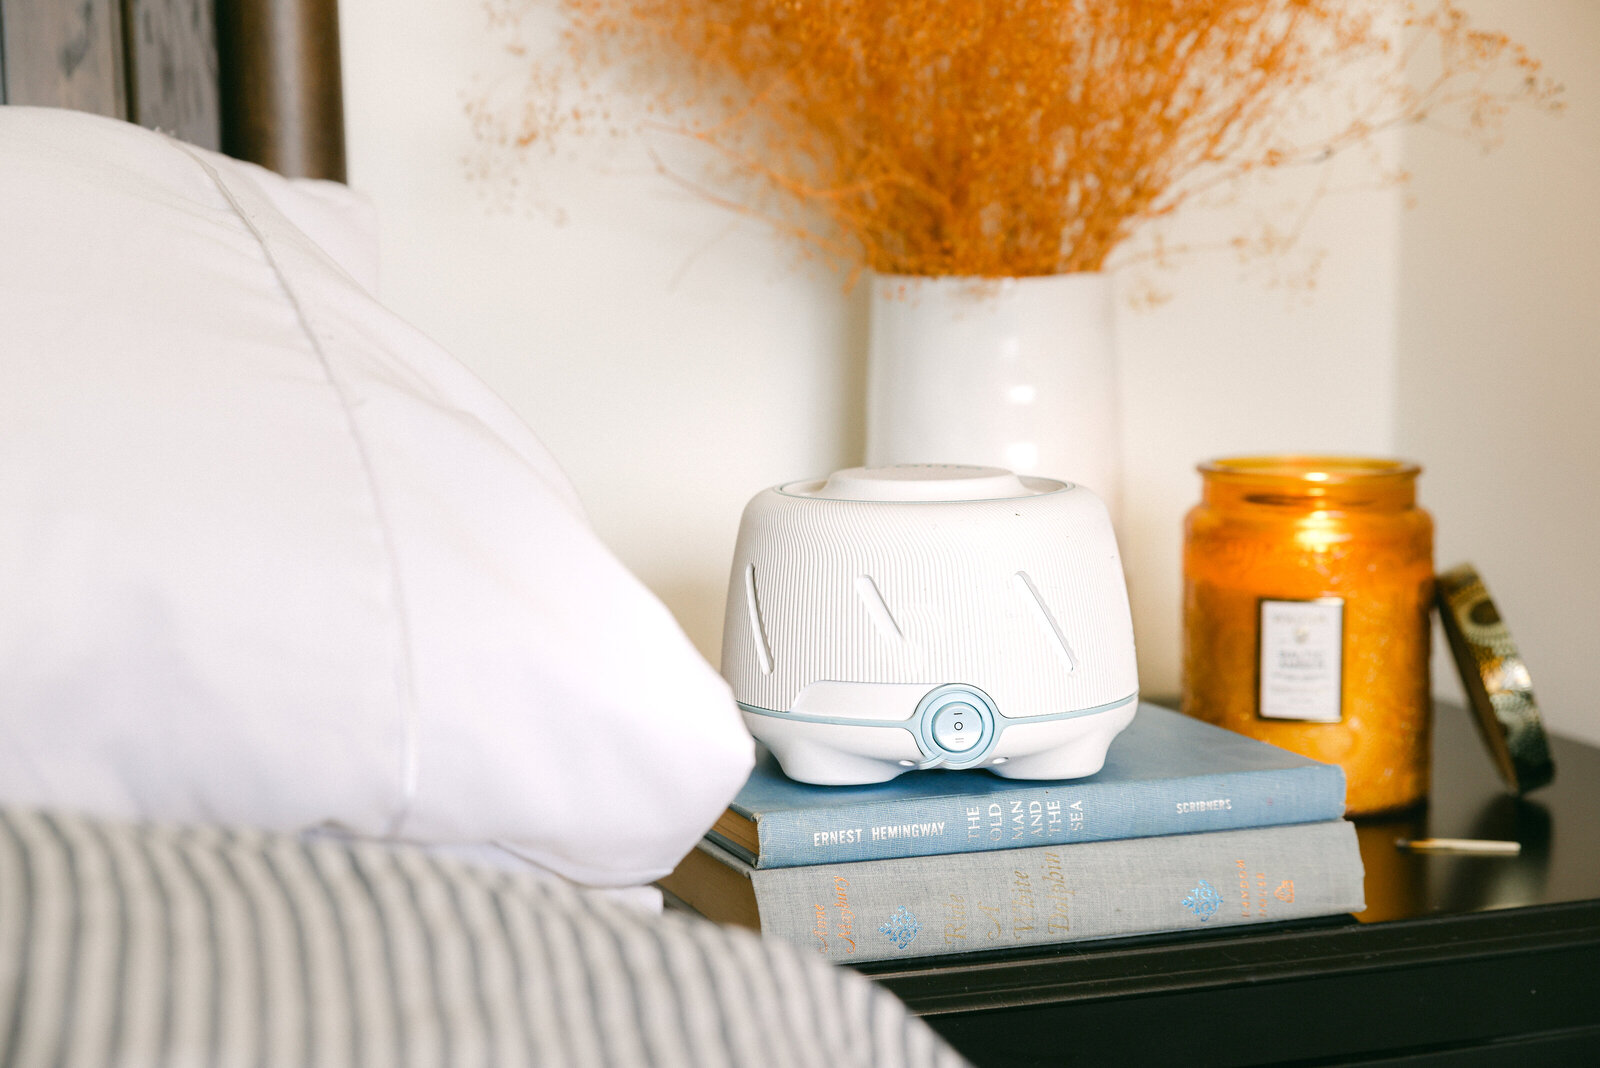 Yogasleep white noise machine styled next to bed with candle